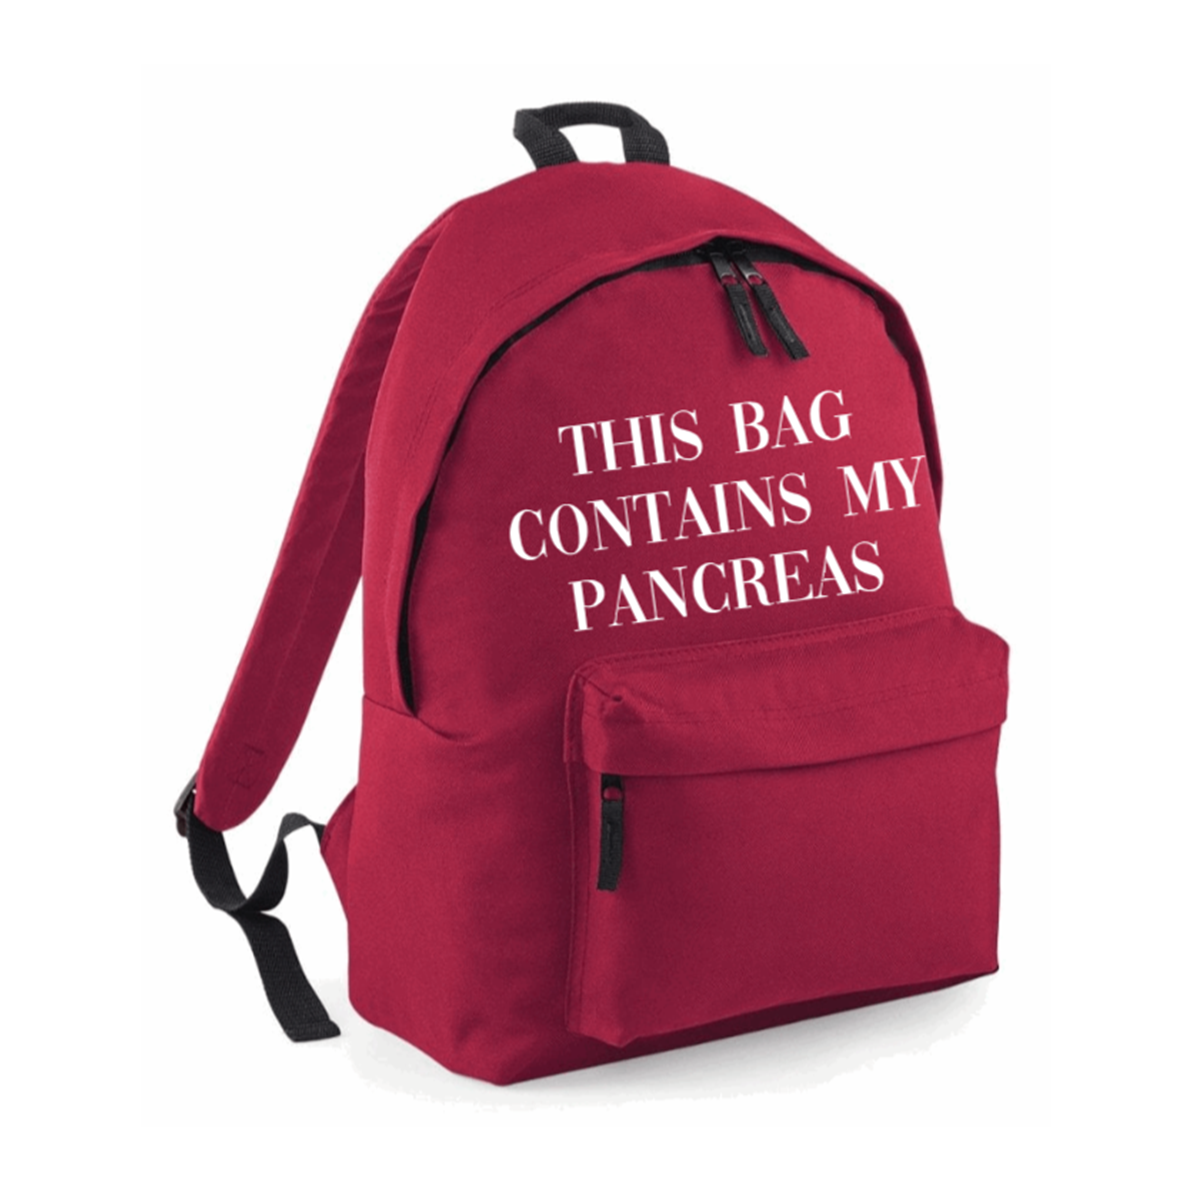 This Bag Contains My Pancreas Backpack